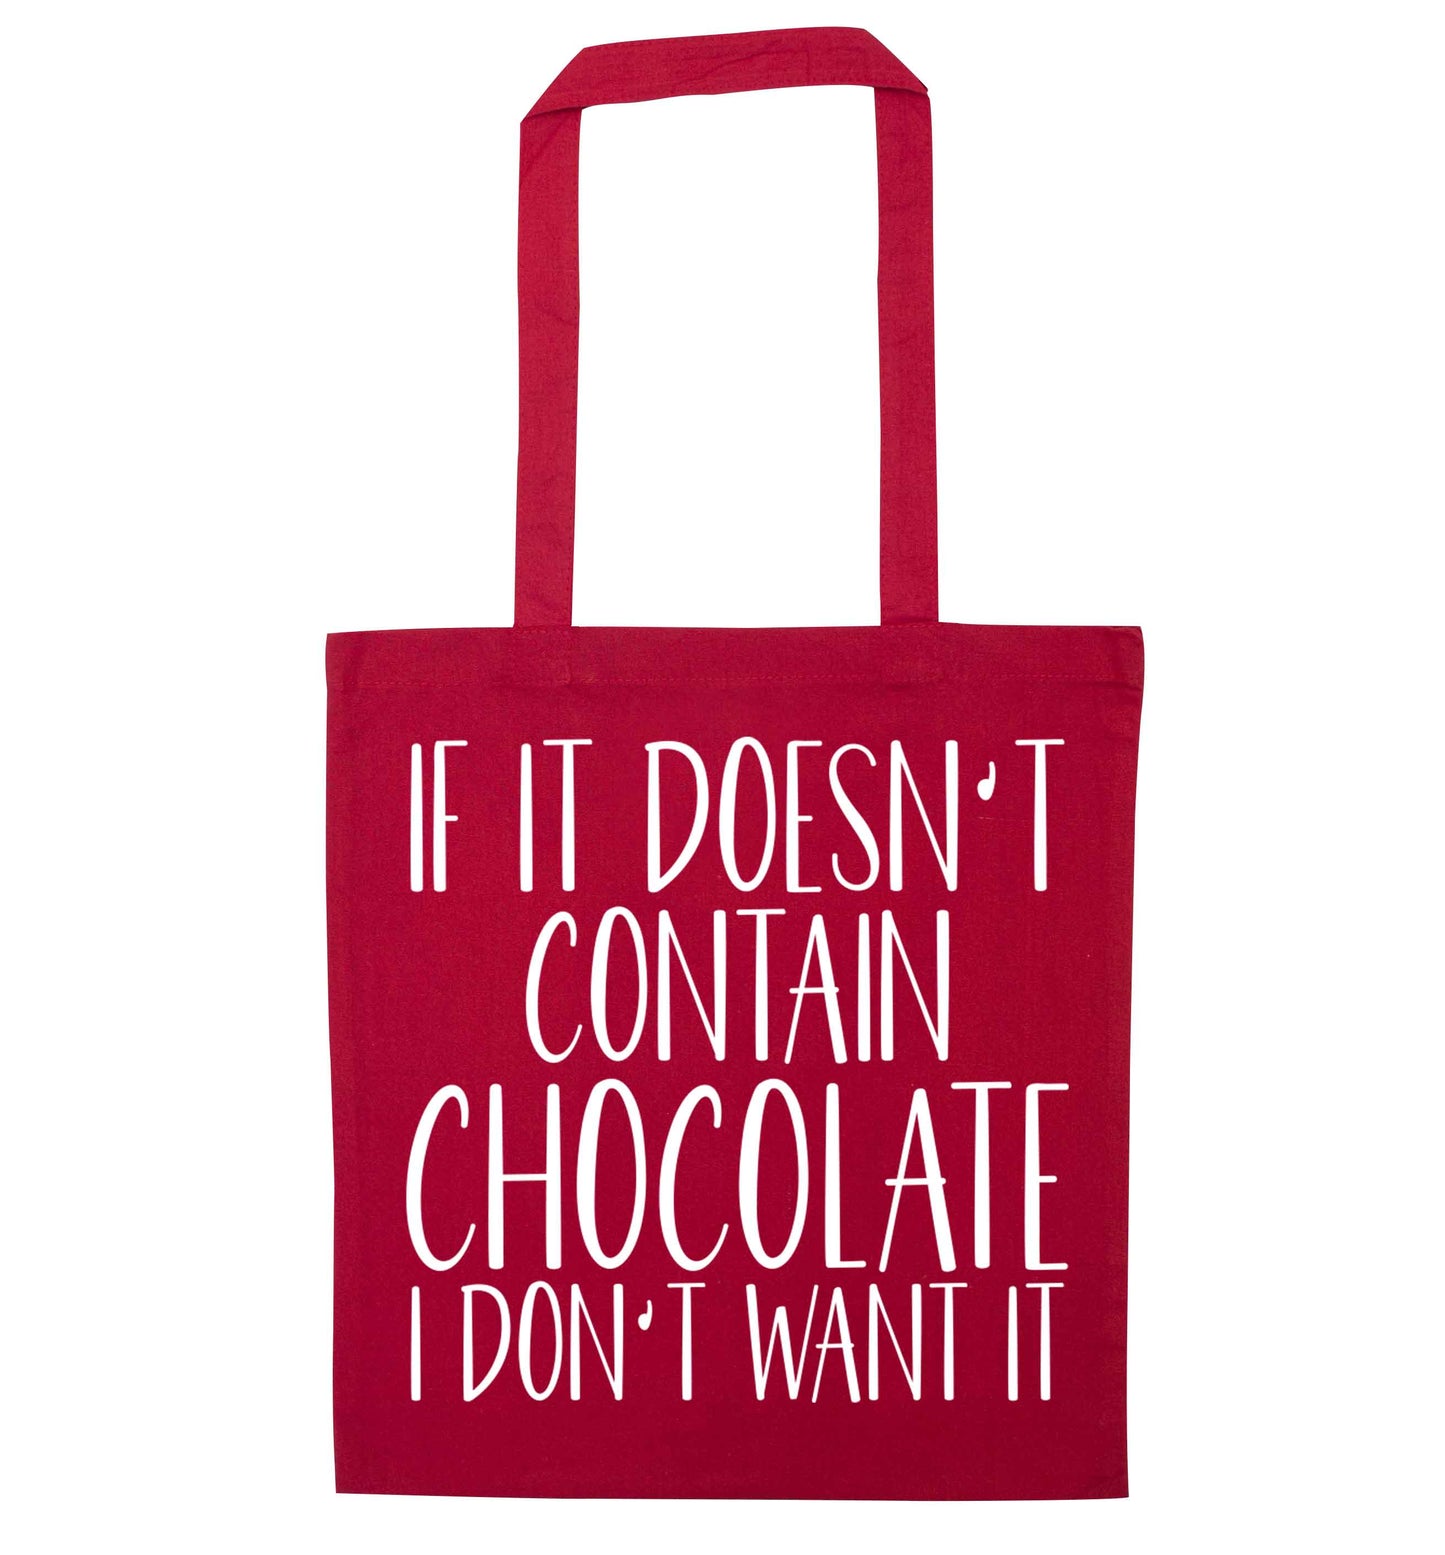 If it doesn't contain chocolate I don't want it red tote bag